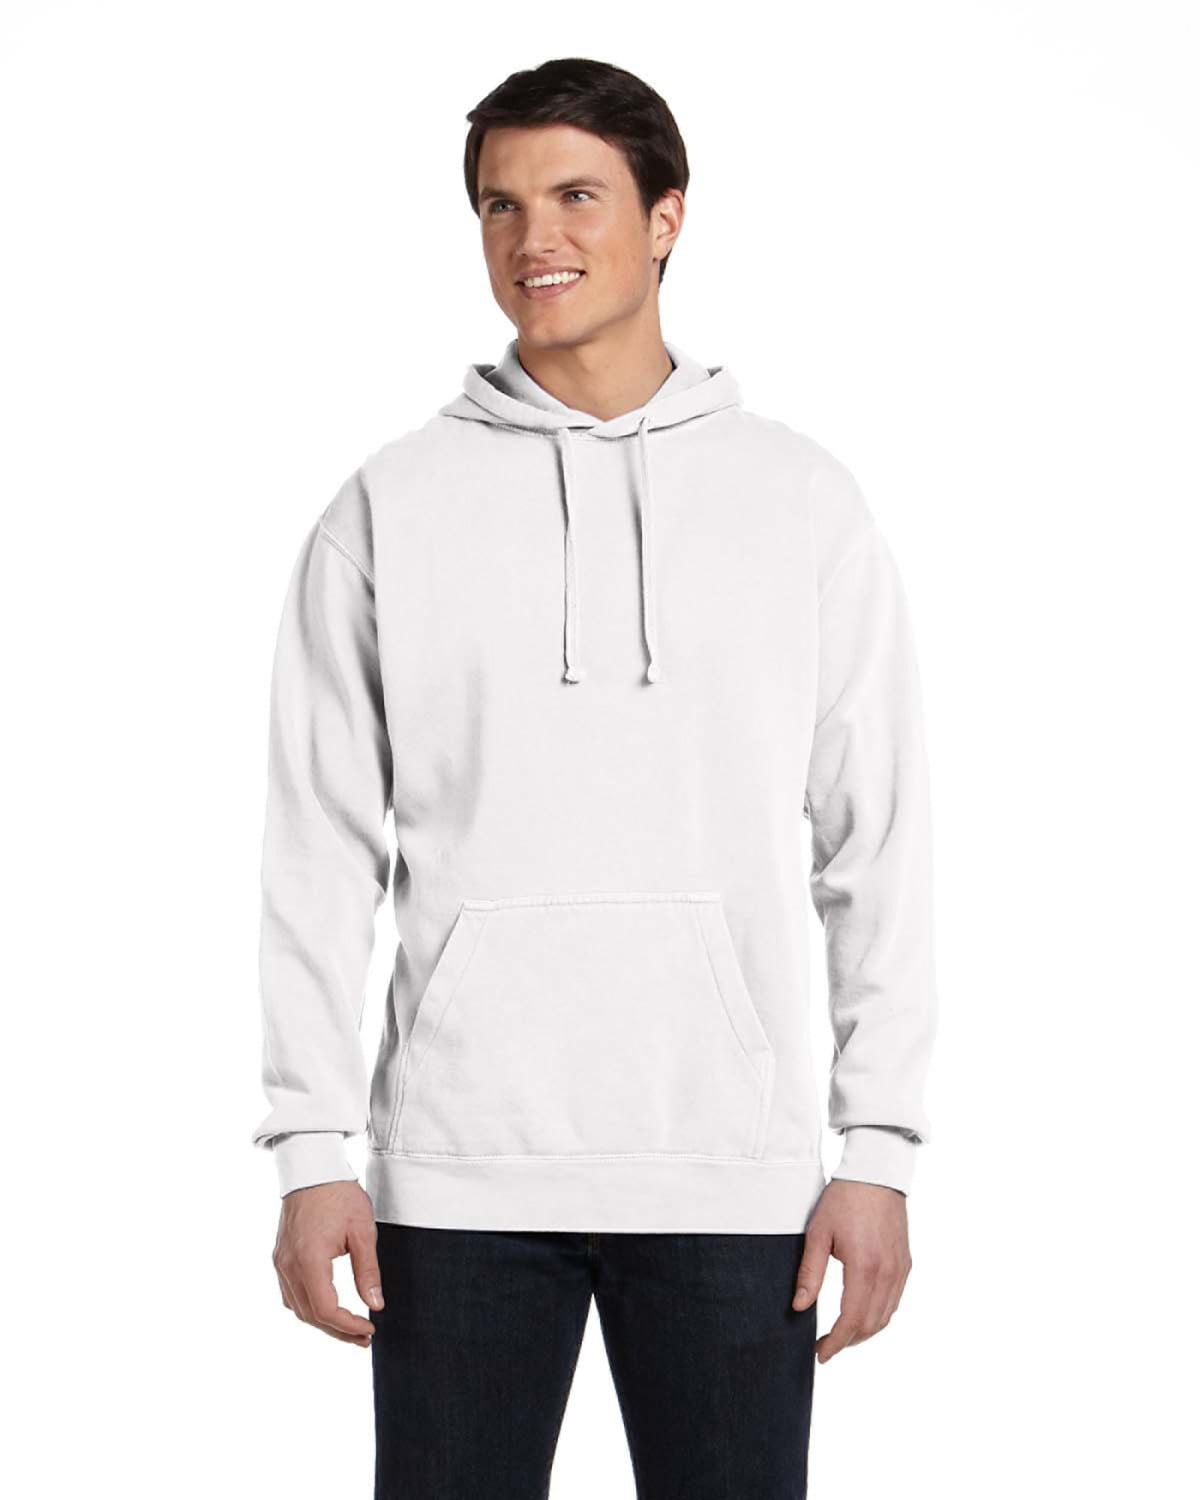 COMFORT COLORS - The Comfort Colors Adult Hooded Sweatshirt - WHITE ...